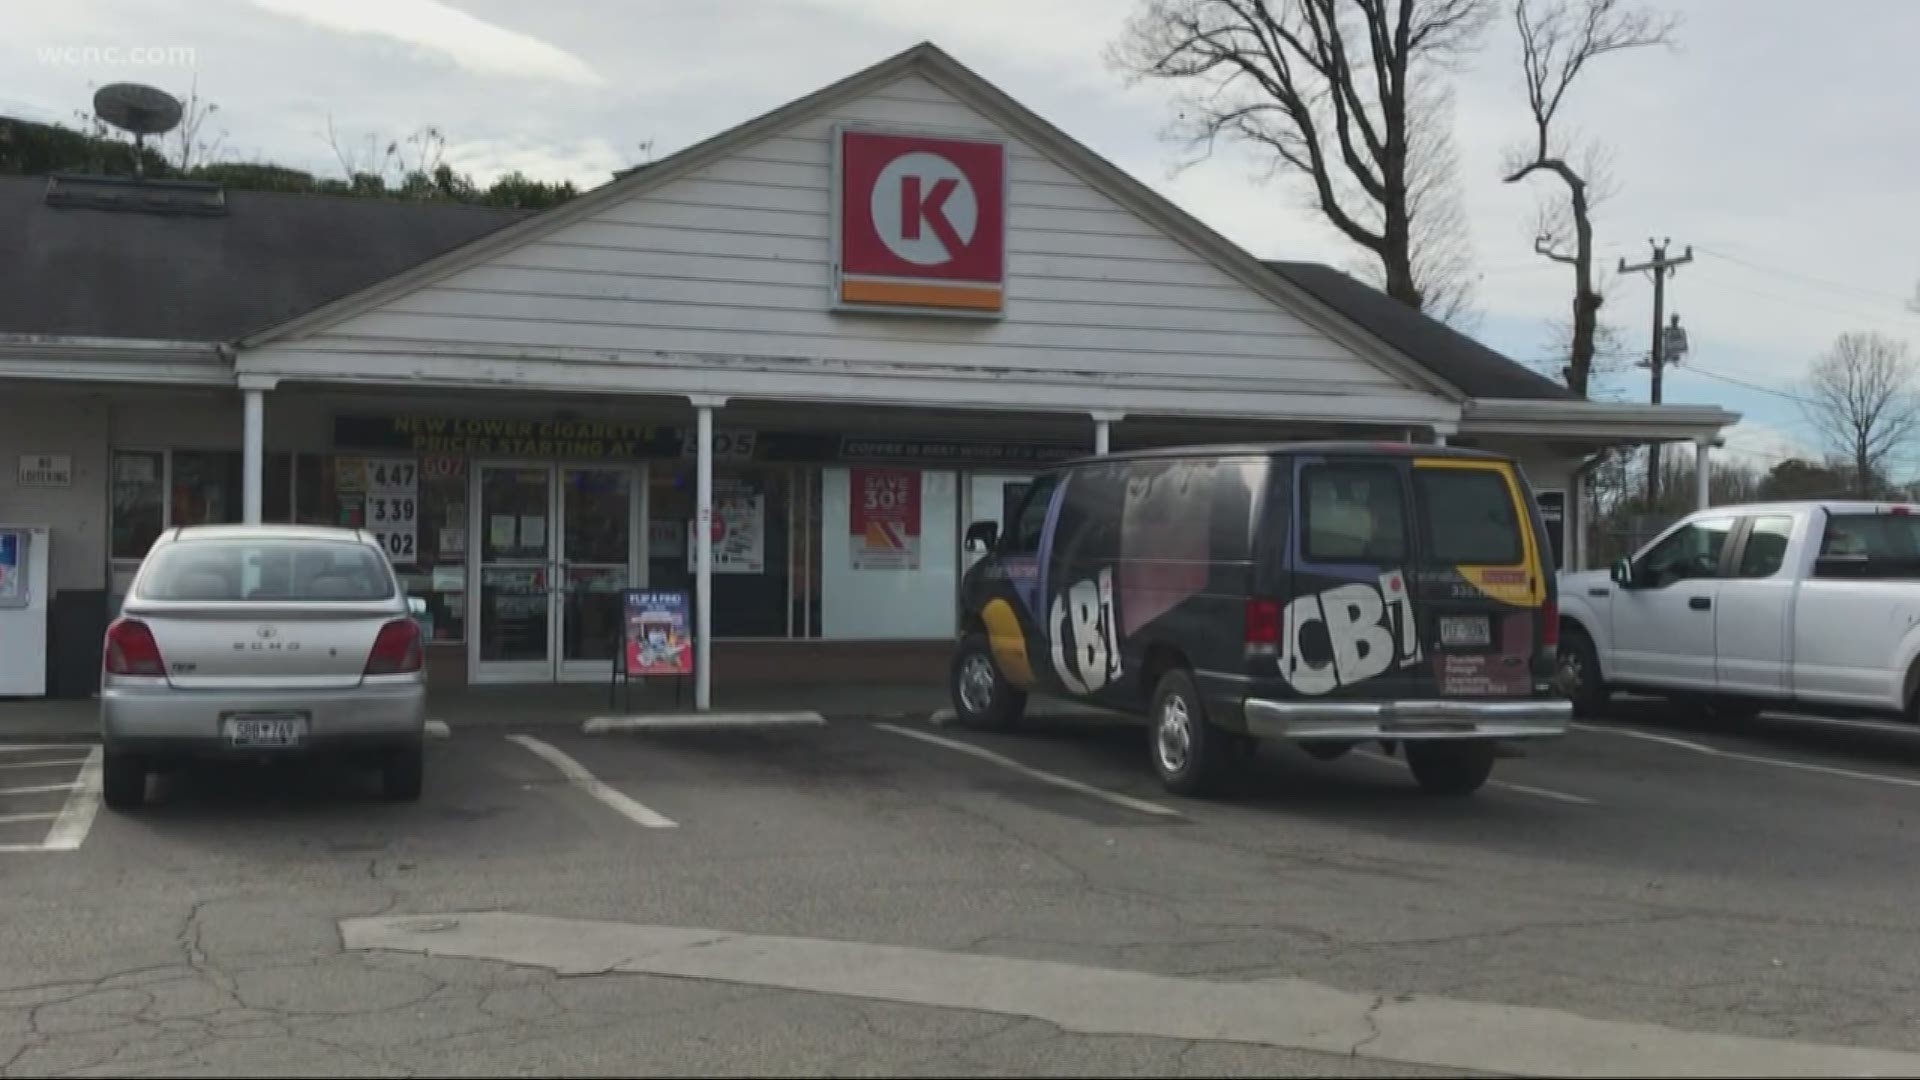 On January 16, officers were called to the Circle K in the 500 block of Old Little Rock Road around 9:40 a.m. to reports of a shooting.